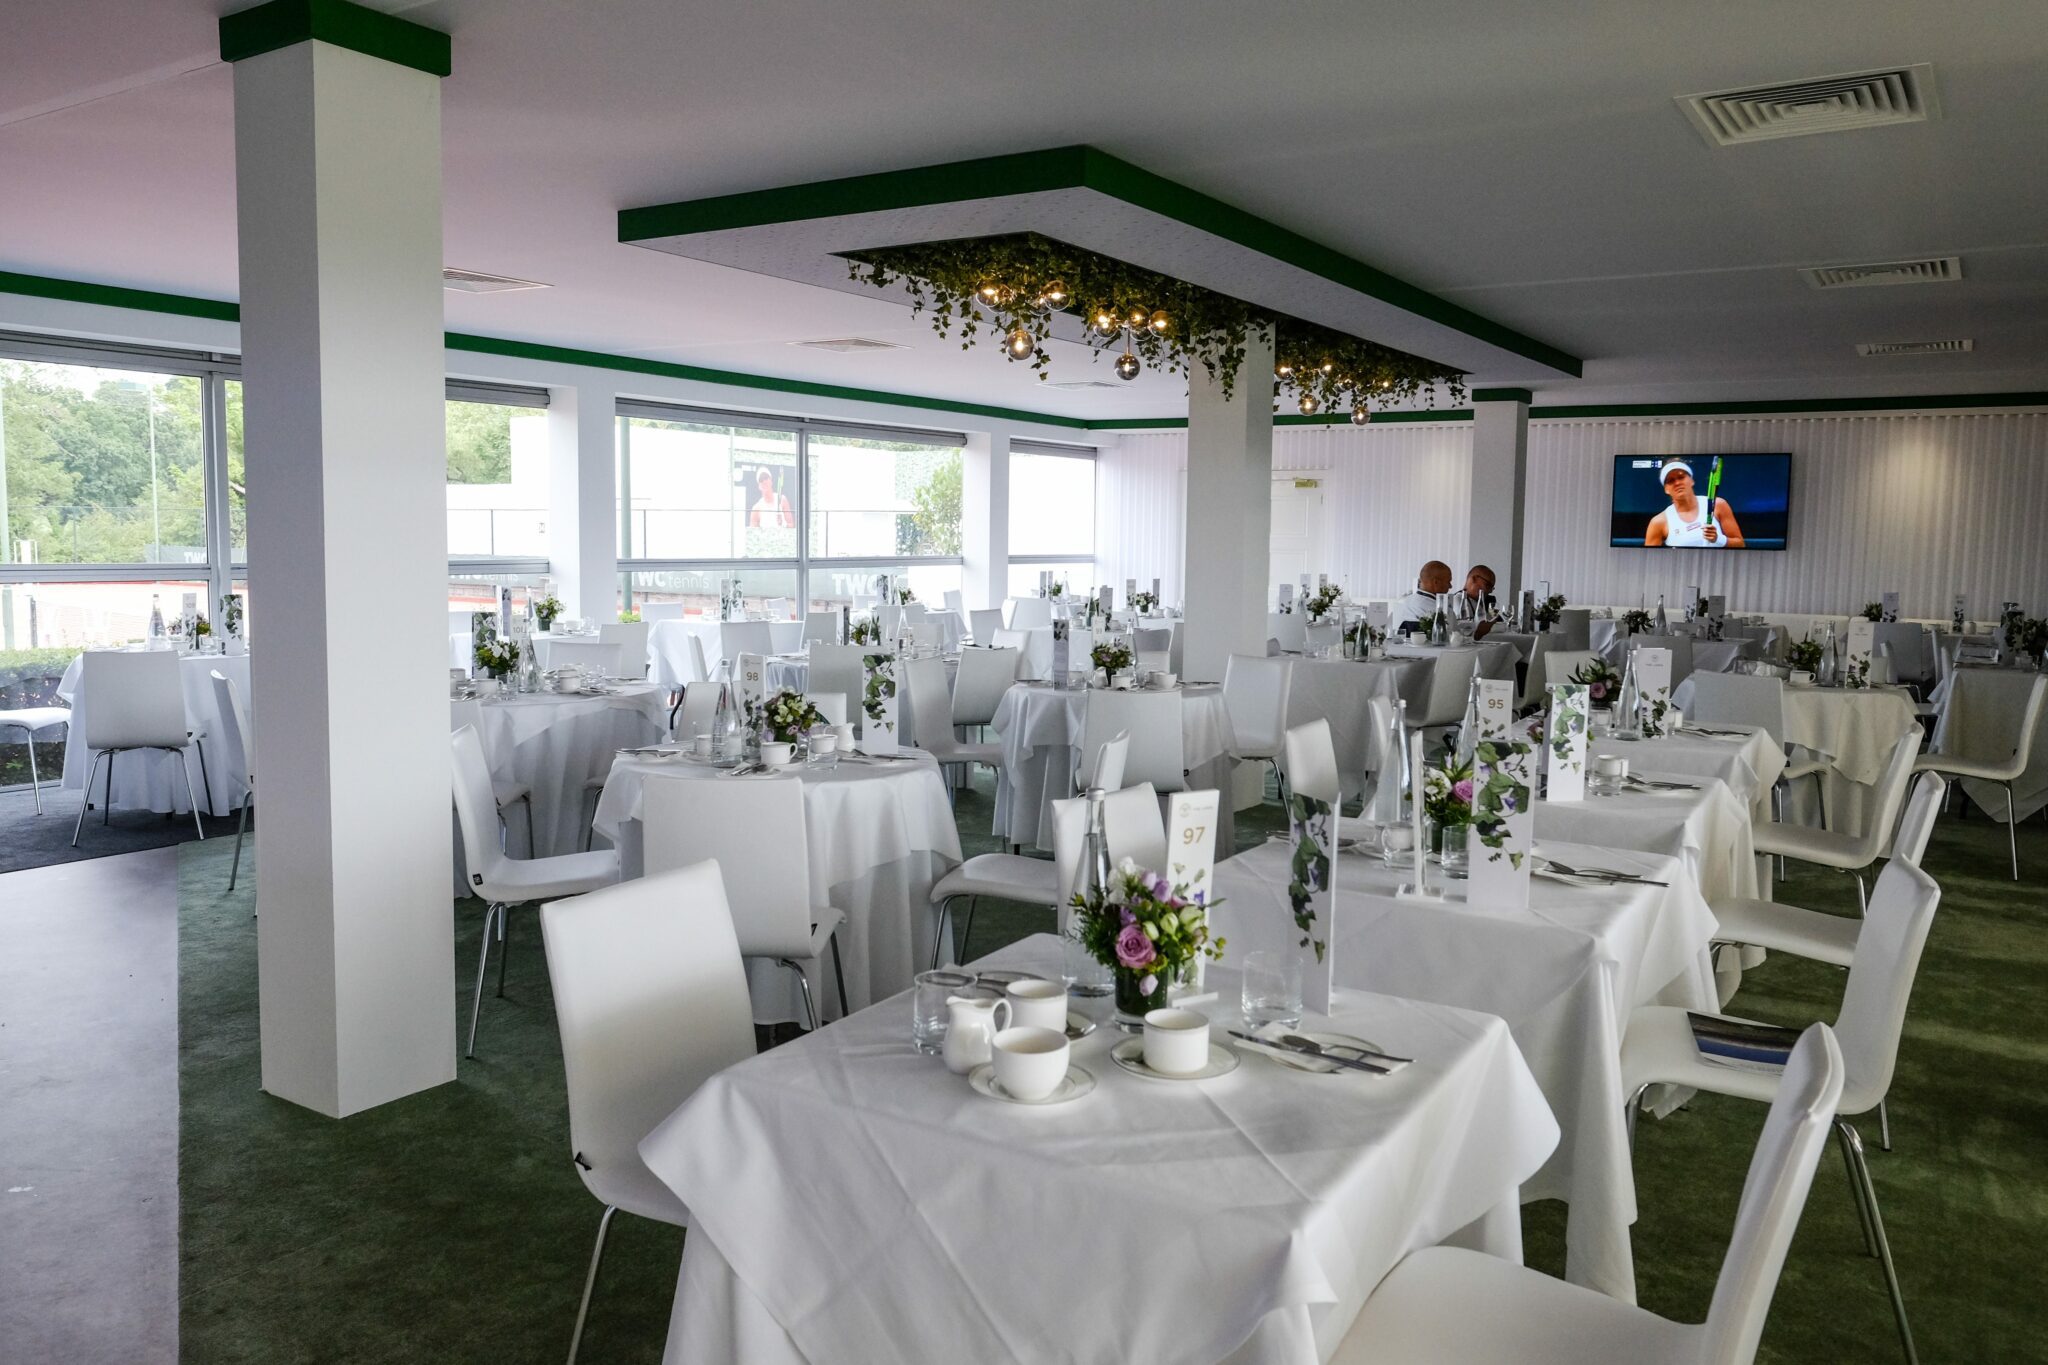 Image of the the indoor seating area at Wimbledon